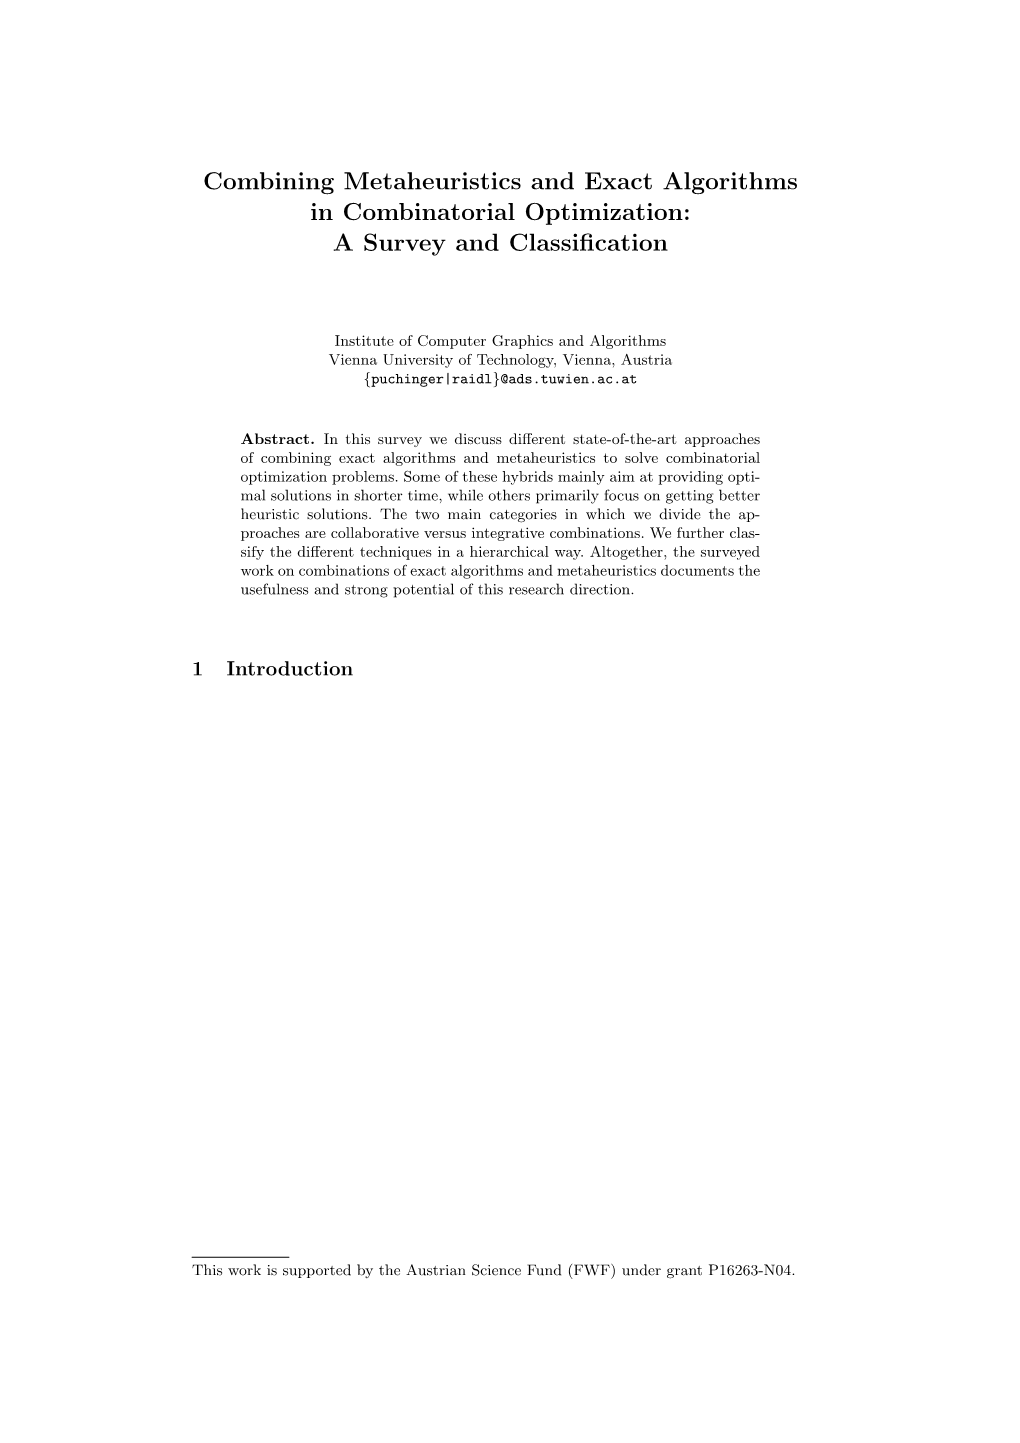 Combining Metaheuristics and Exact Algorithms in Combinatorial Optimization: a Survey and Classiﬁcation